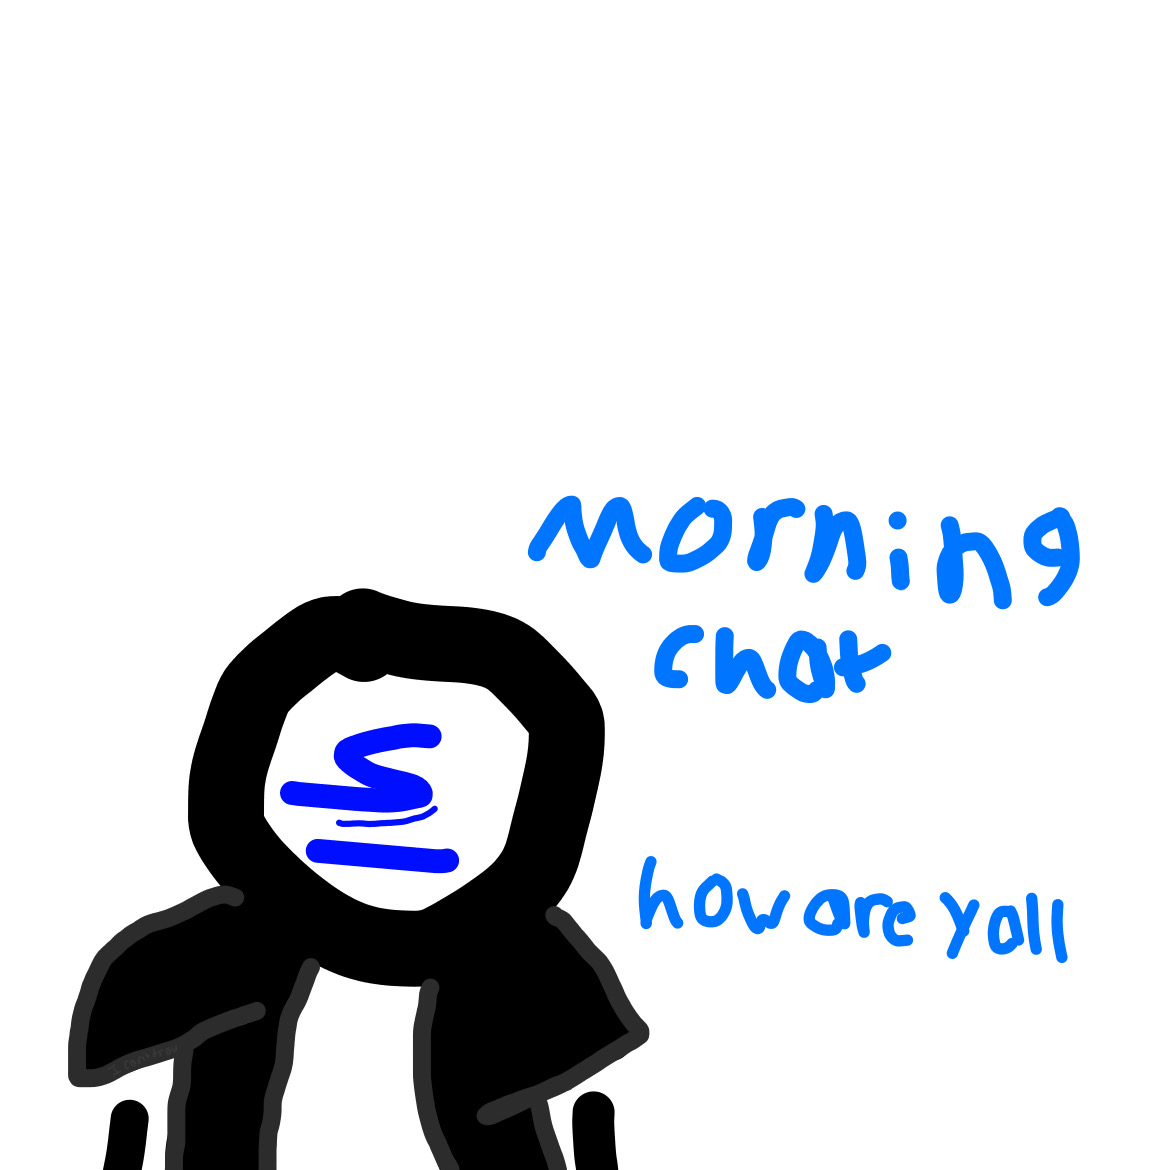 High Quality Shady morning chat Blank Meme Template